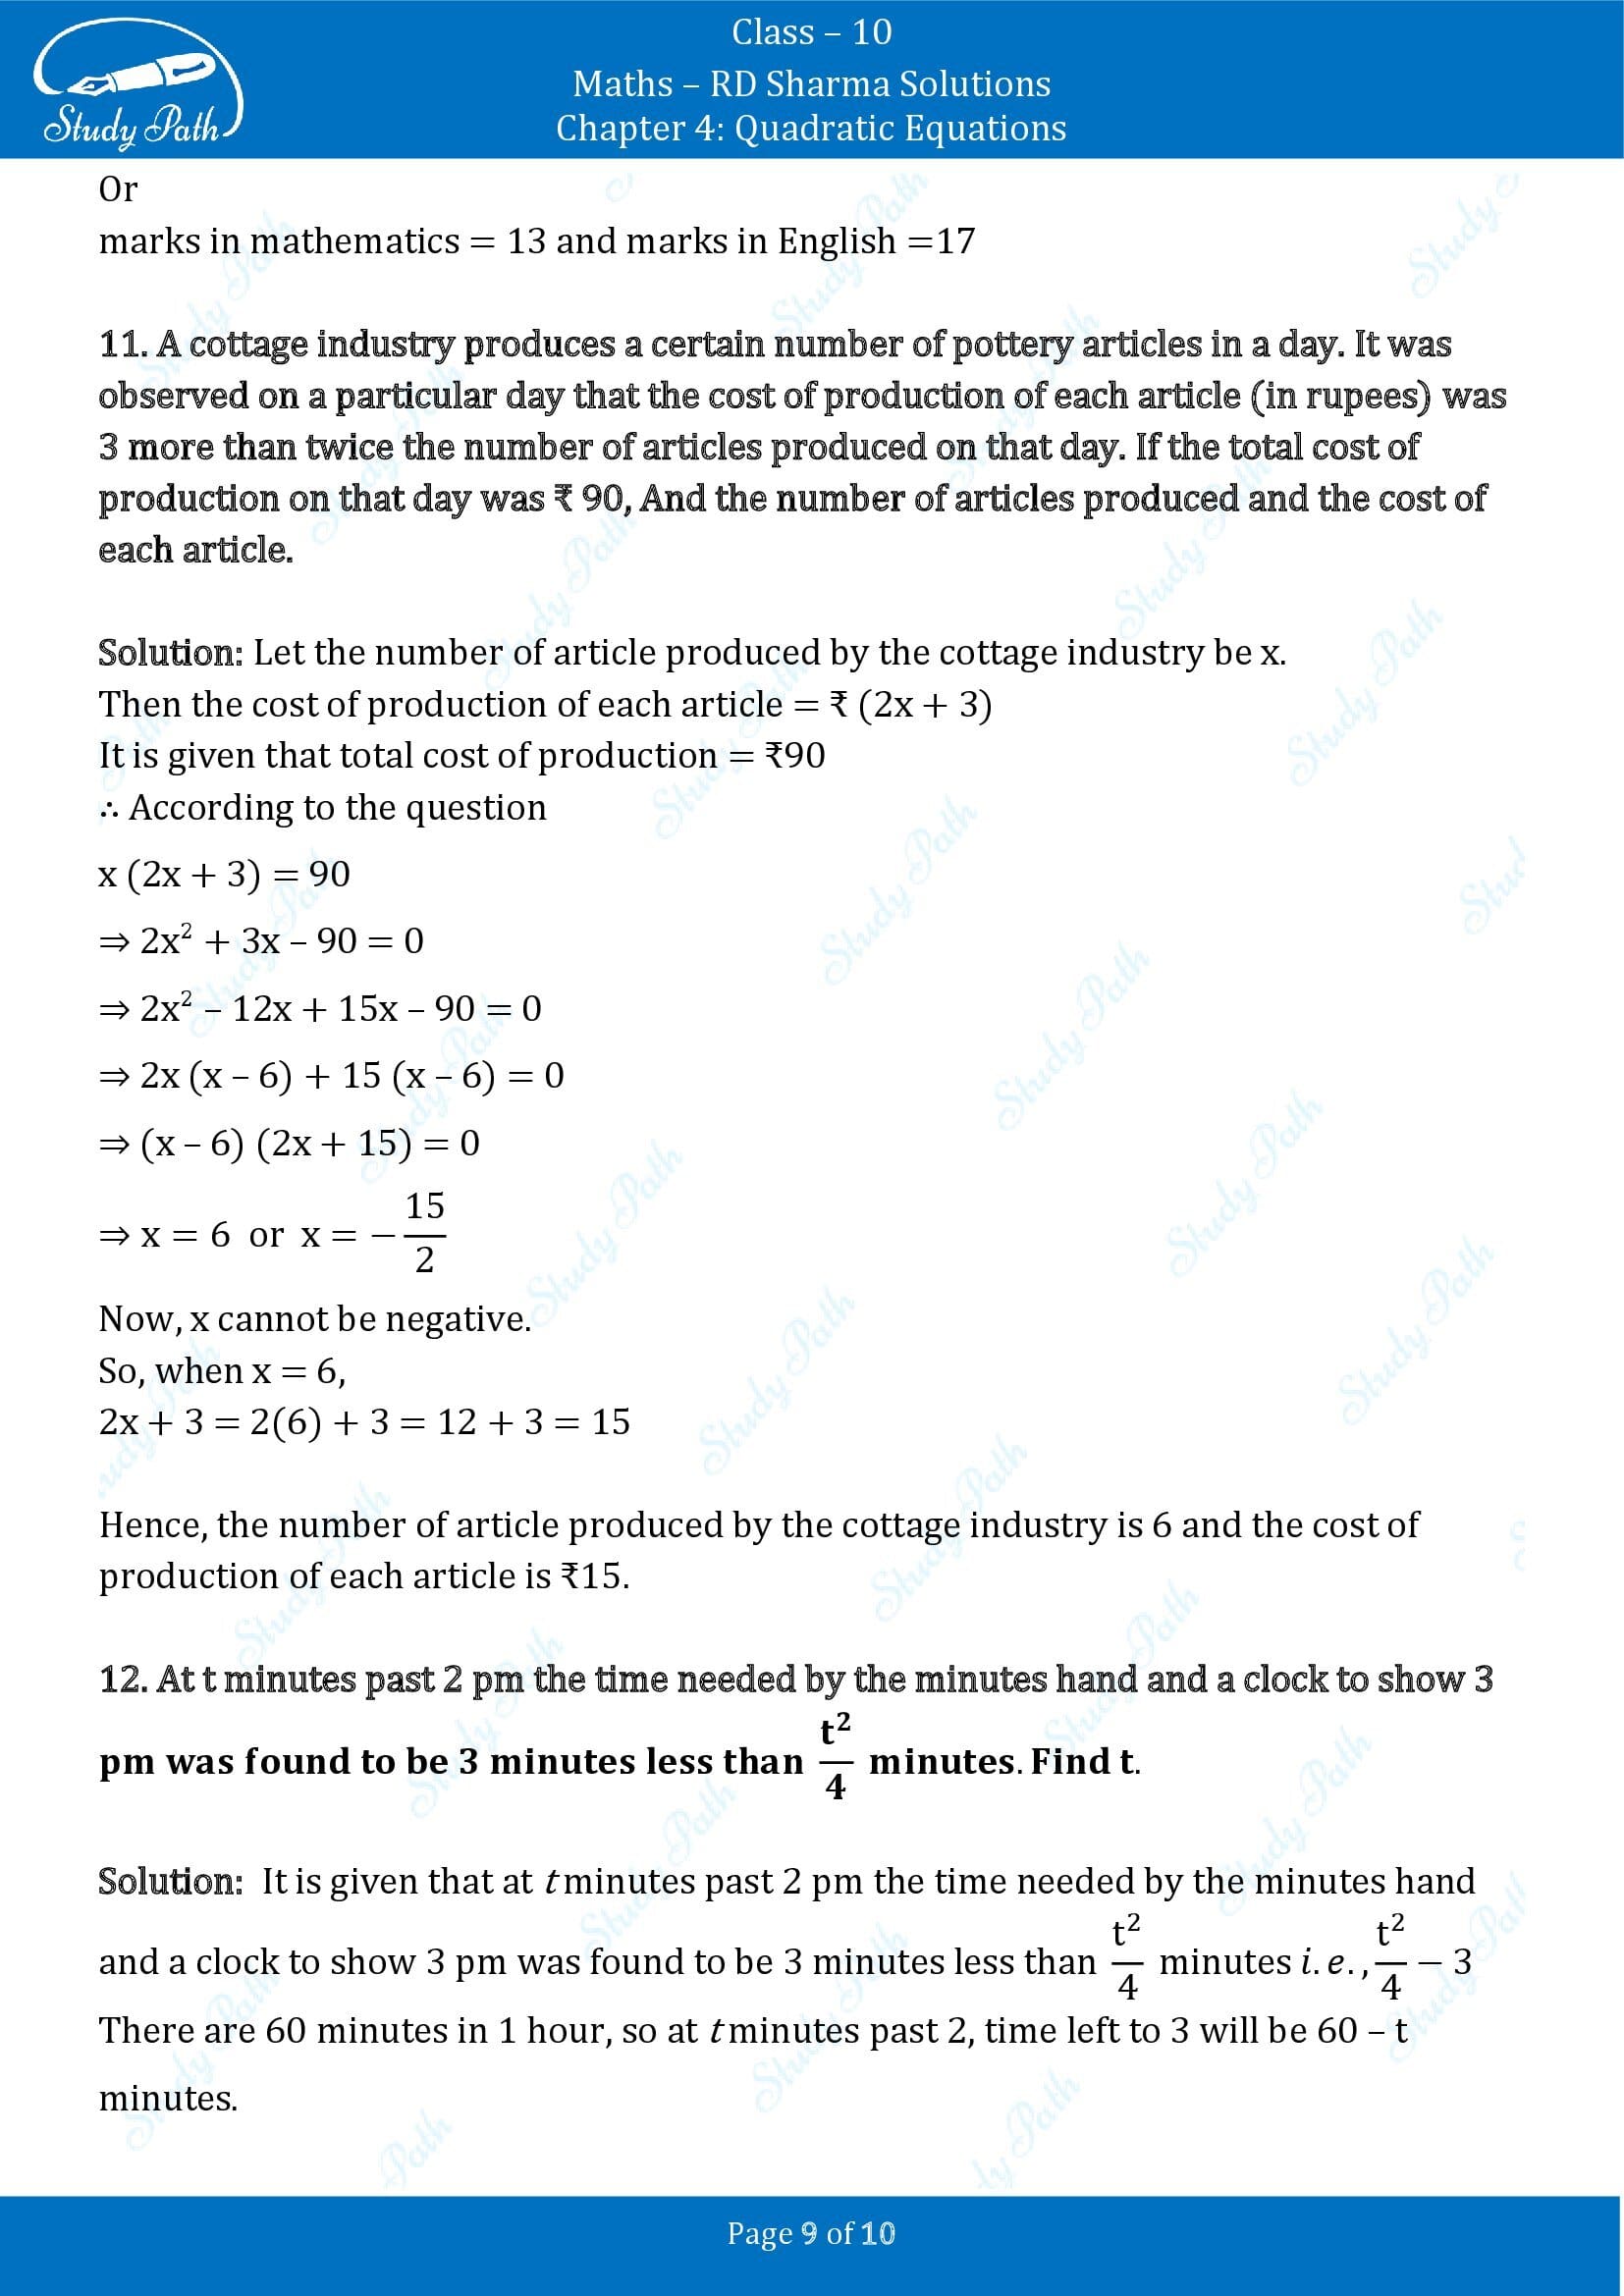 RD Sharma Solutions Class 10 Chapter 4 Quadratic Equations Exercise 4.13 00009